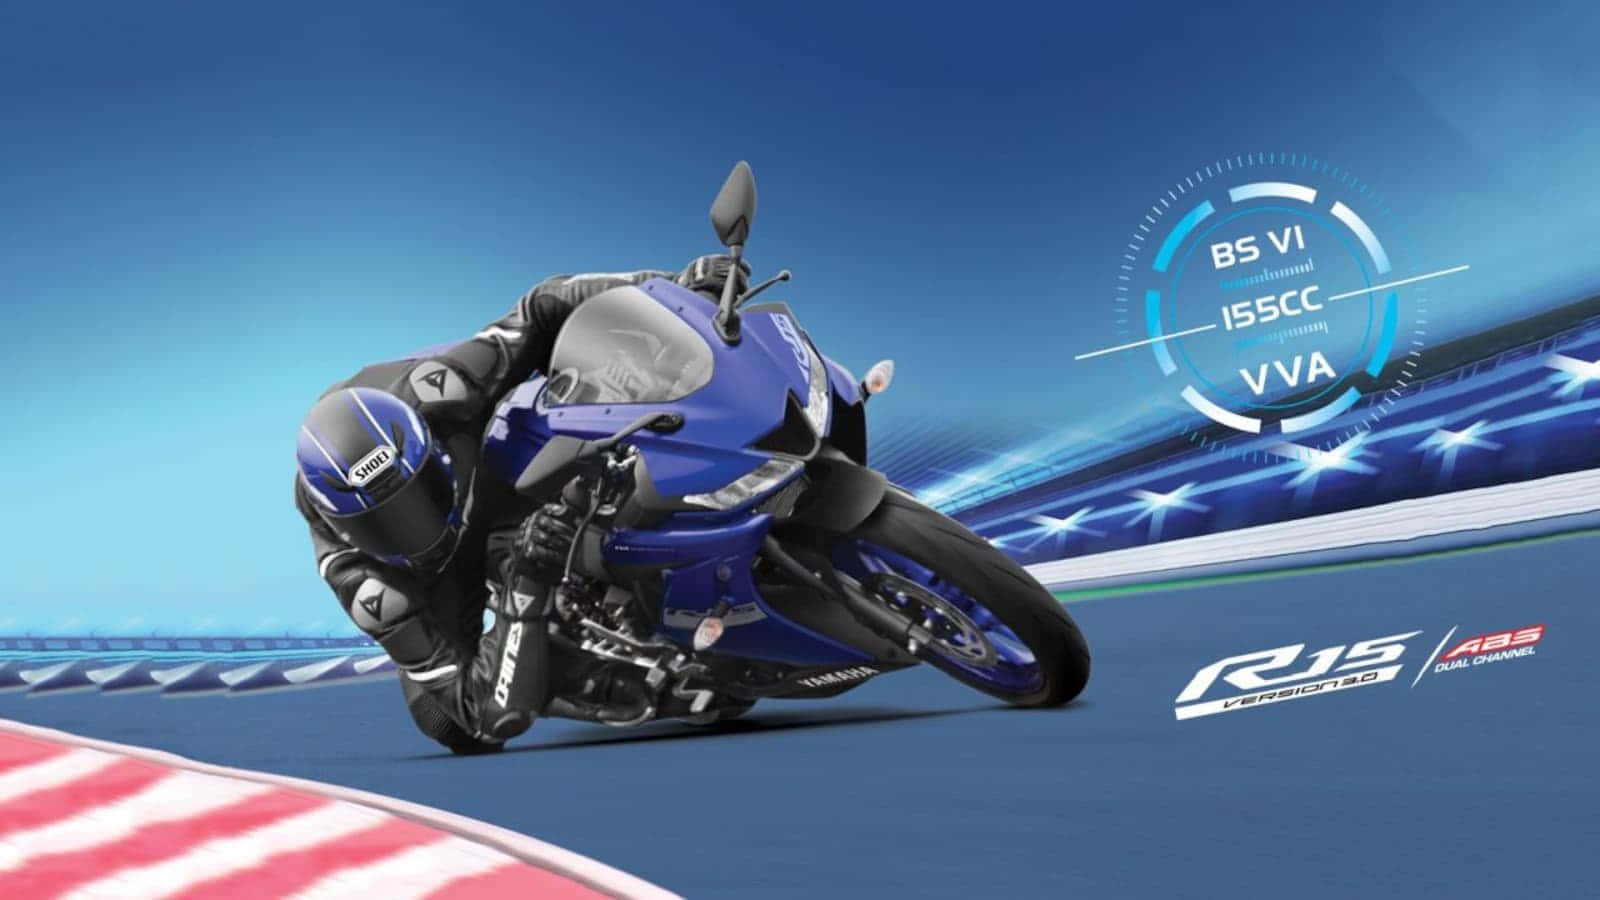 Ride in Style with the Yamaha R15